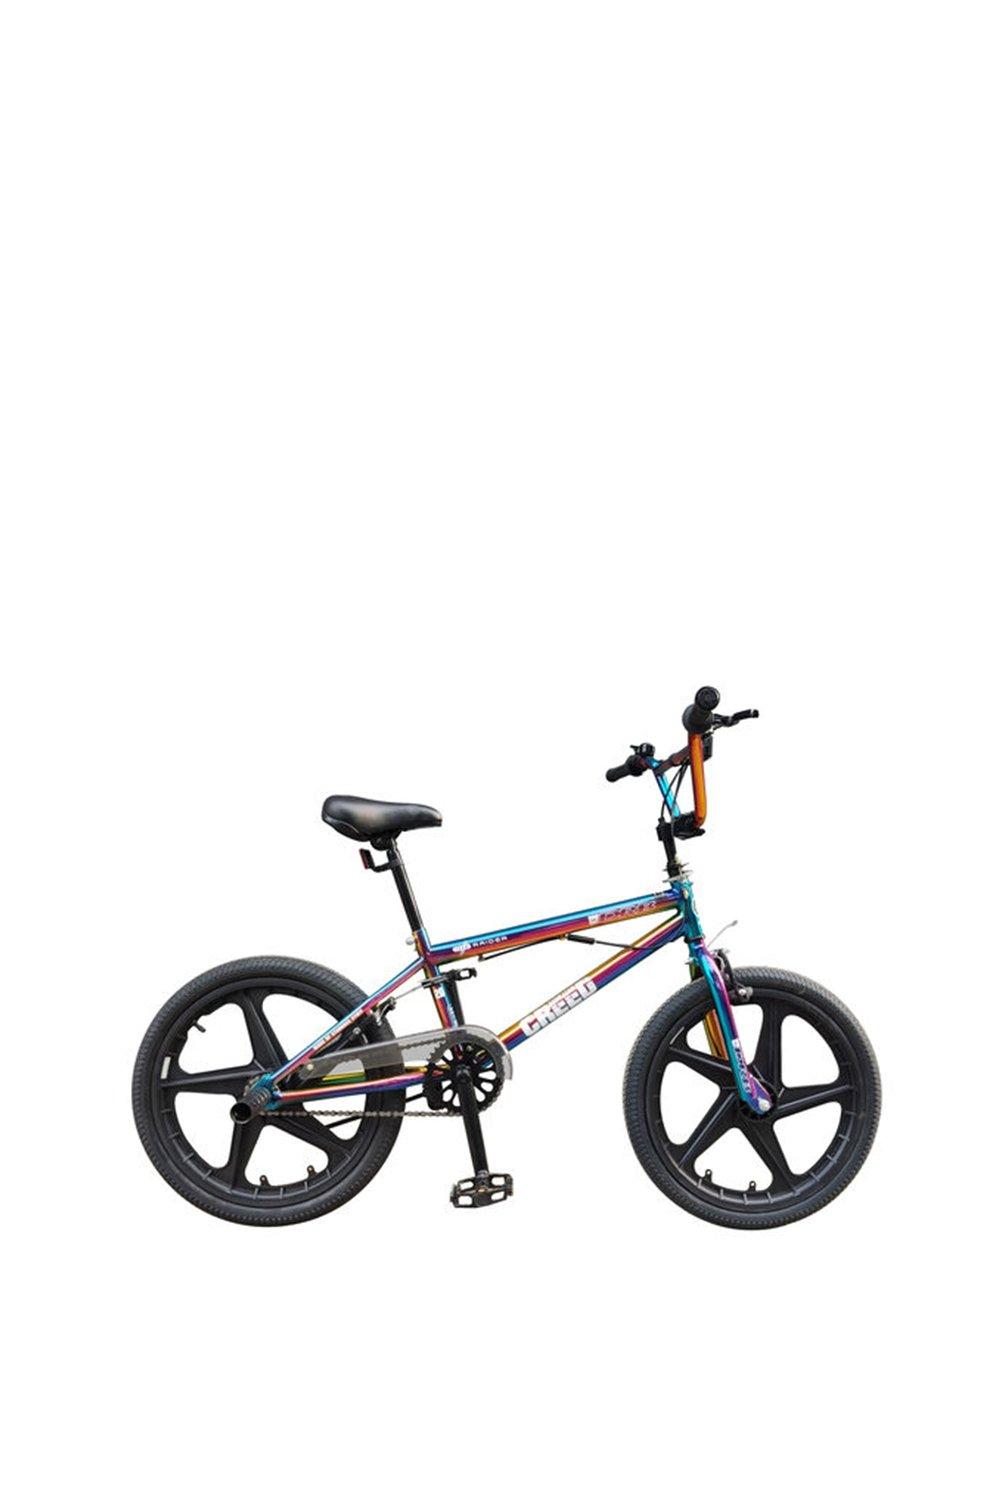 Creed MAG Freestyle BMX 20in Wheel